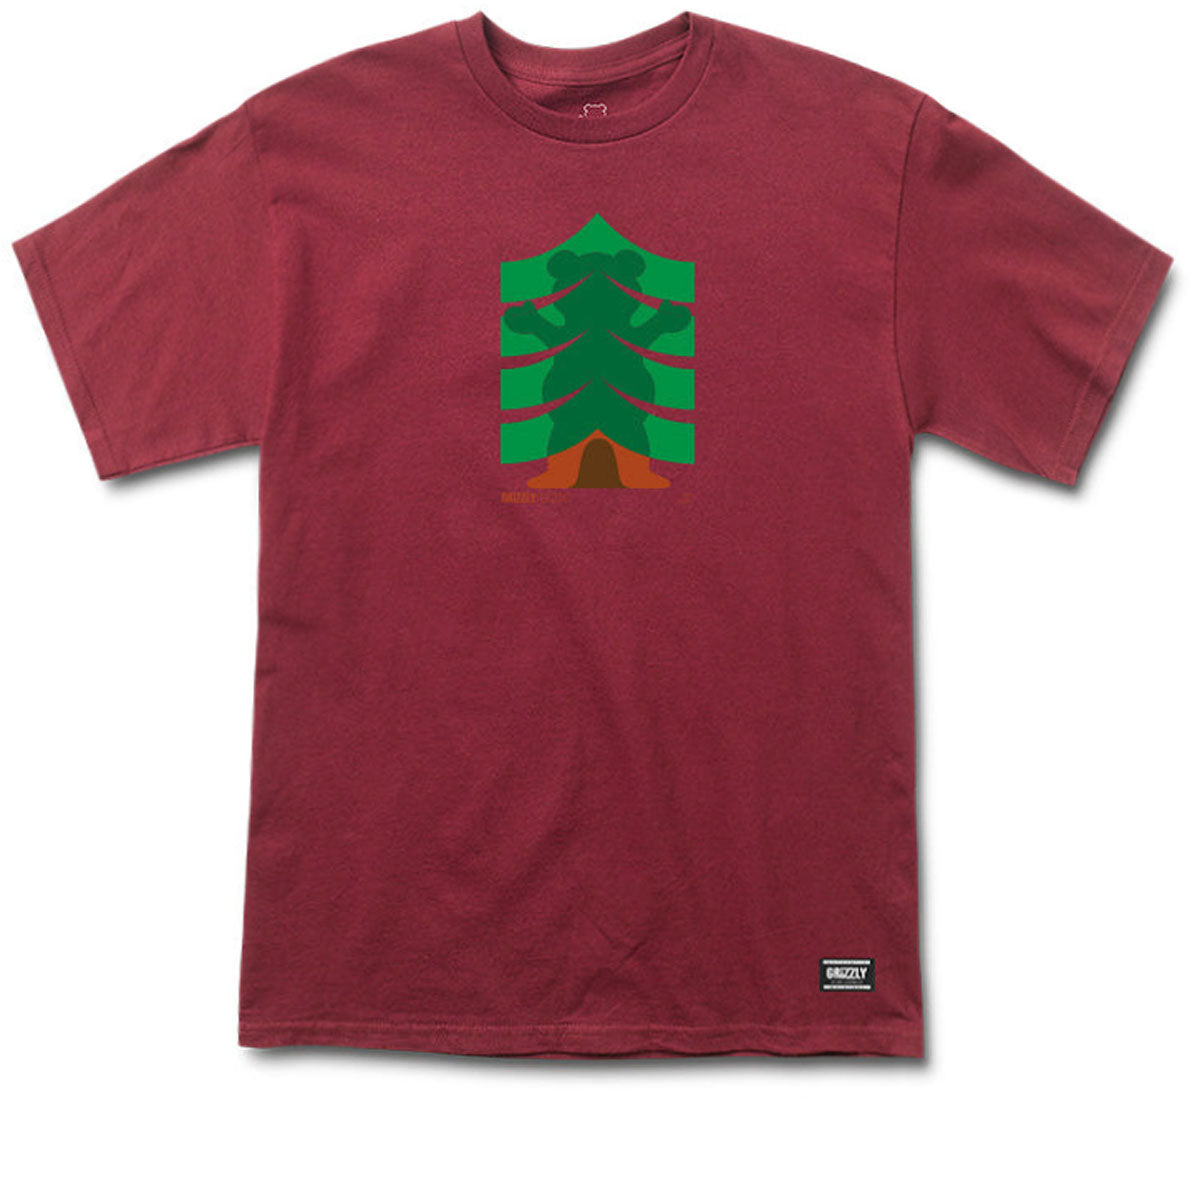 Grizzly Strong Branches T-Shirt - Burgundy image 1